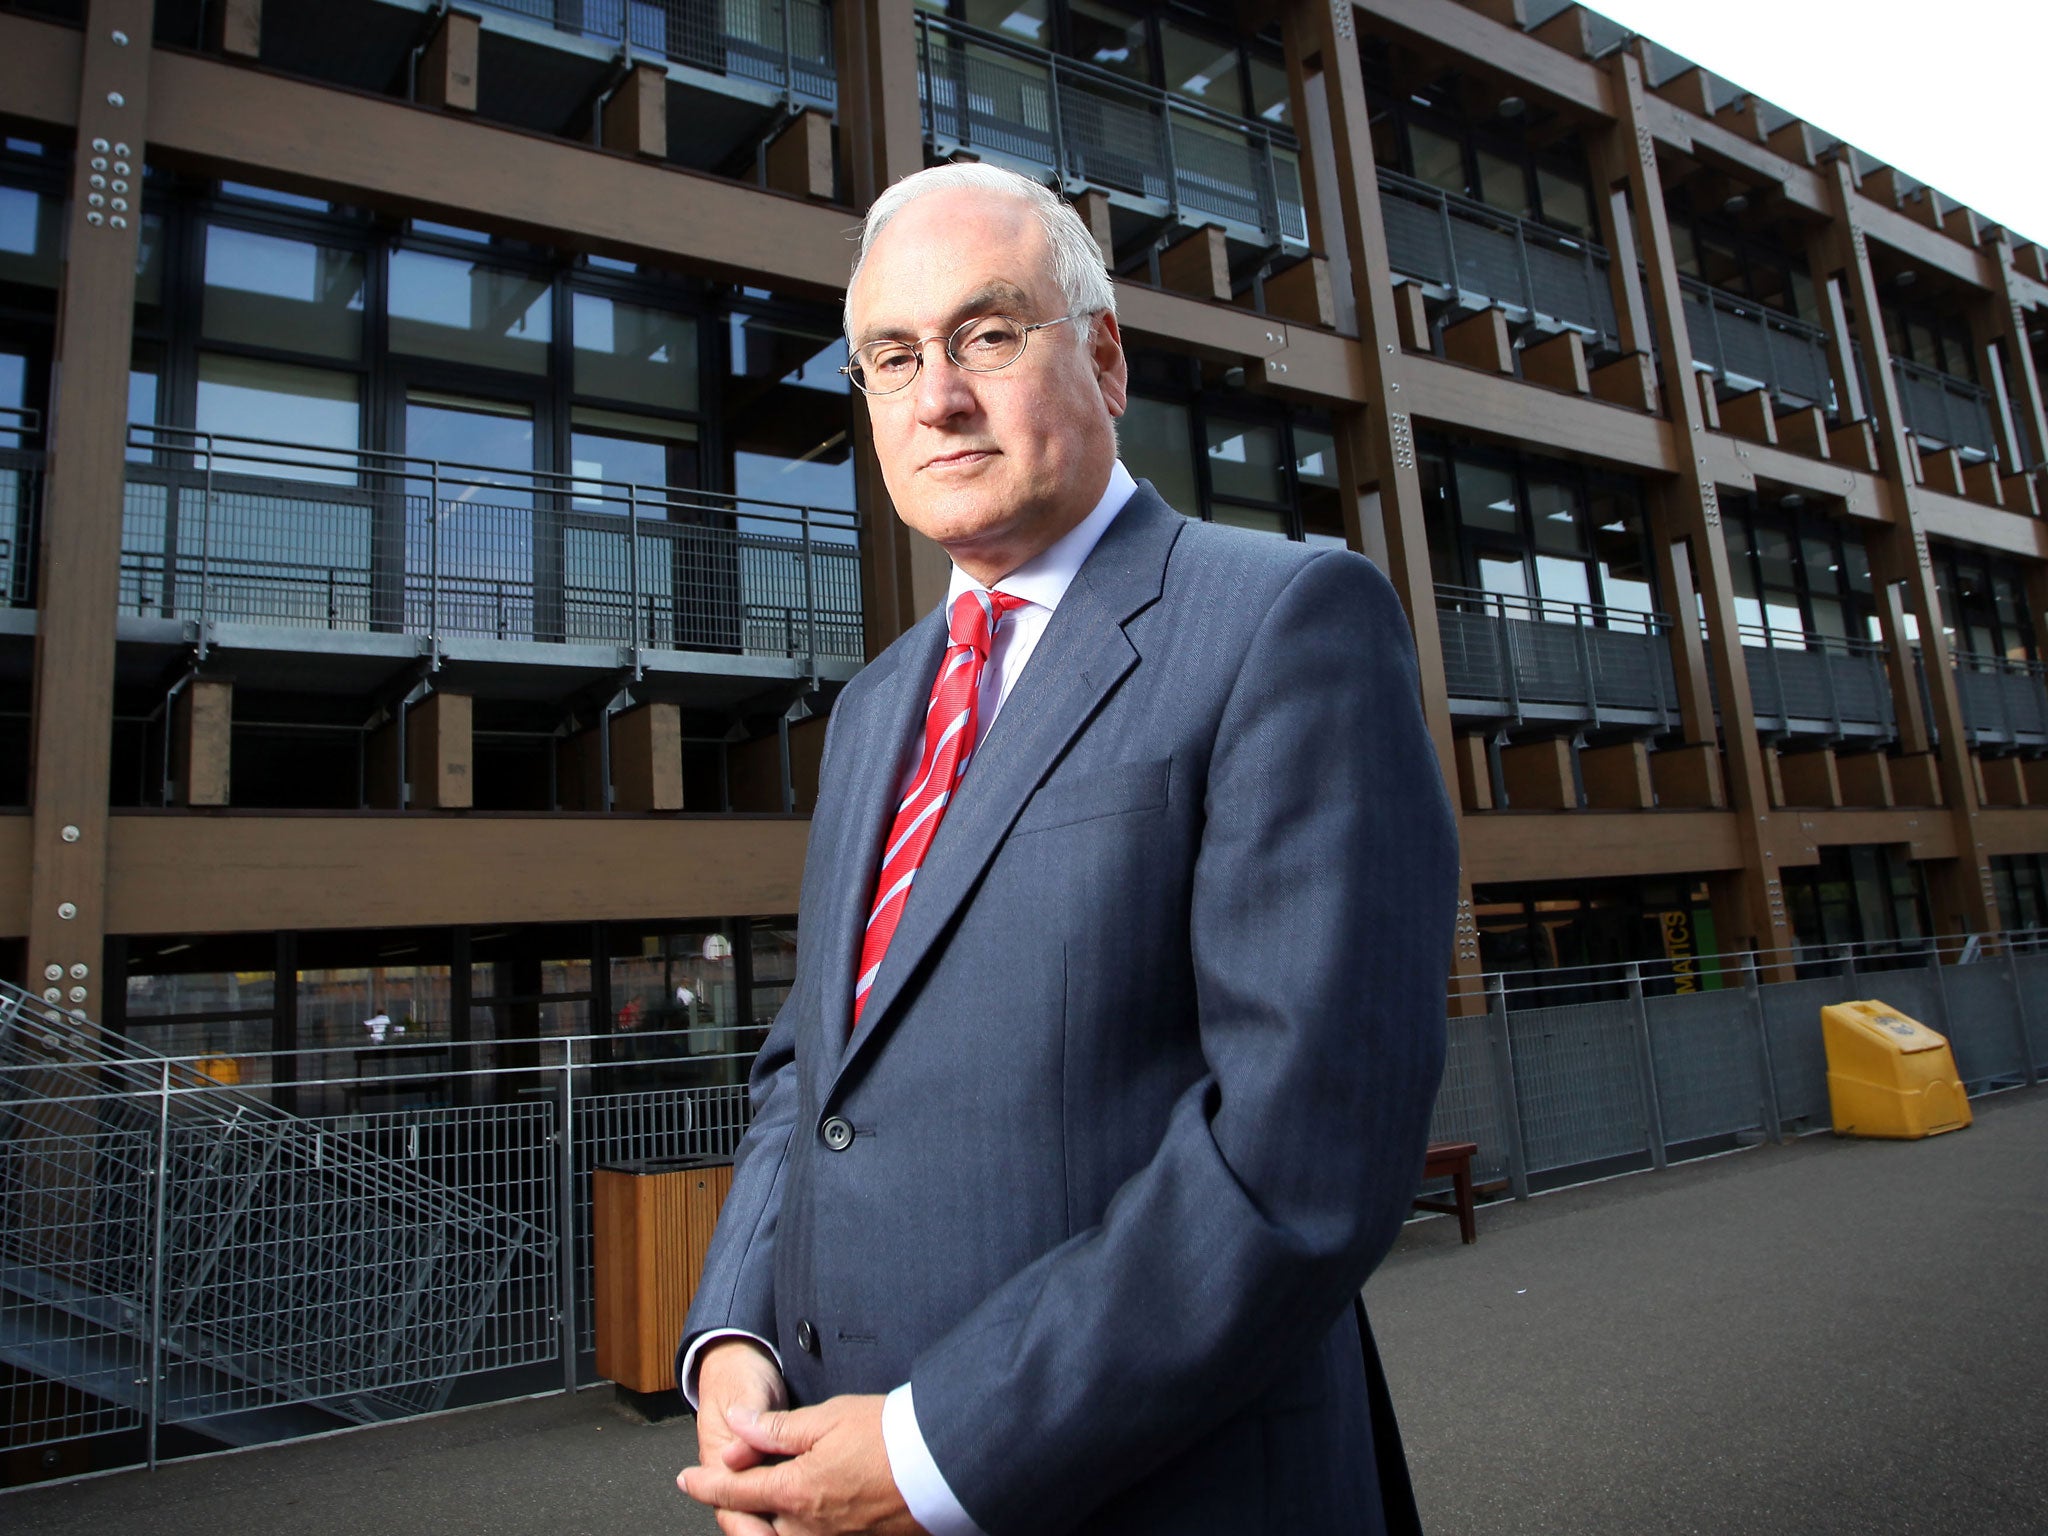 Sir Michael Wilshaw has said Ofsted will be producing reports on schools' capacity to cope with large numbers of migrant children